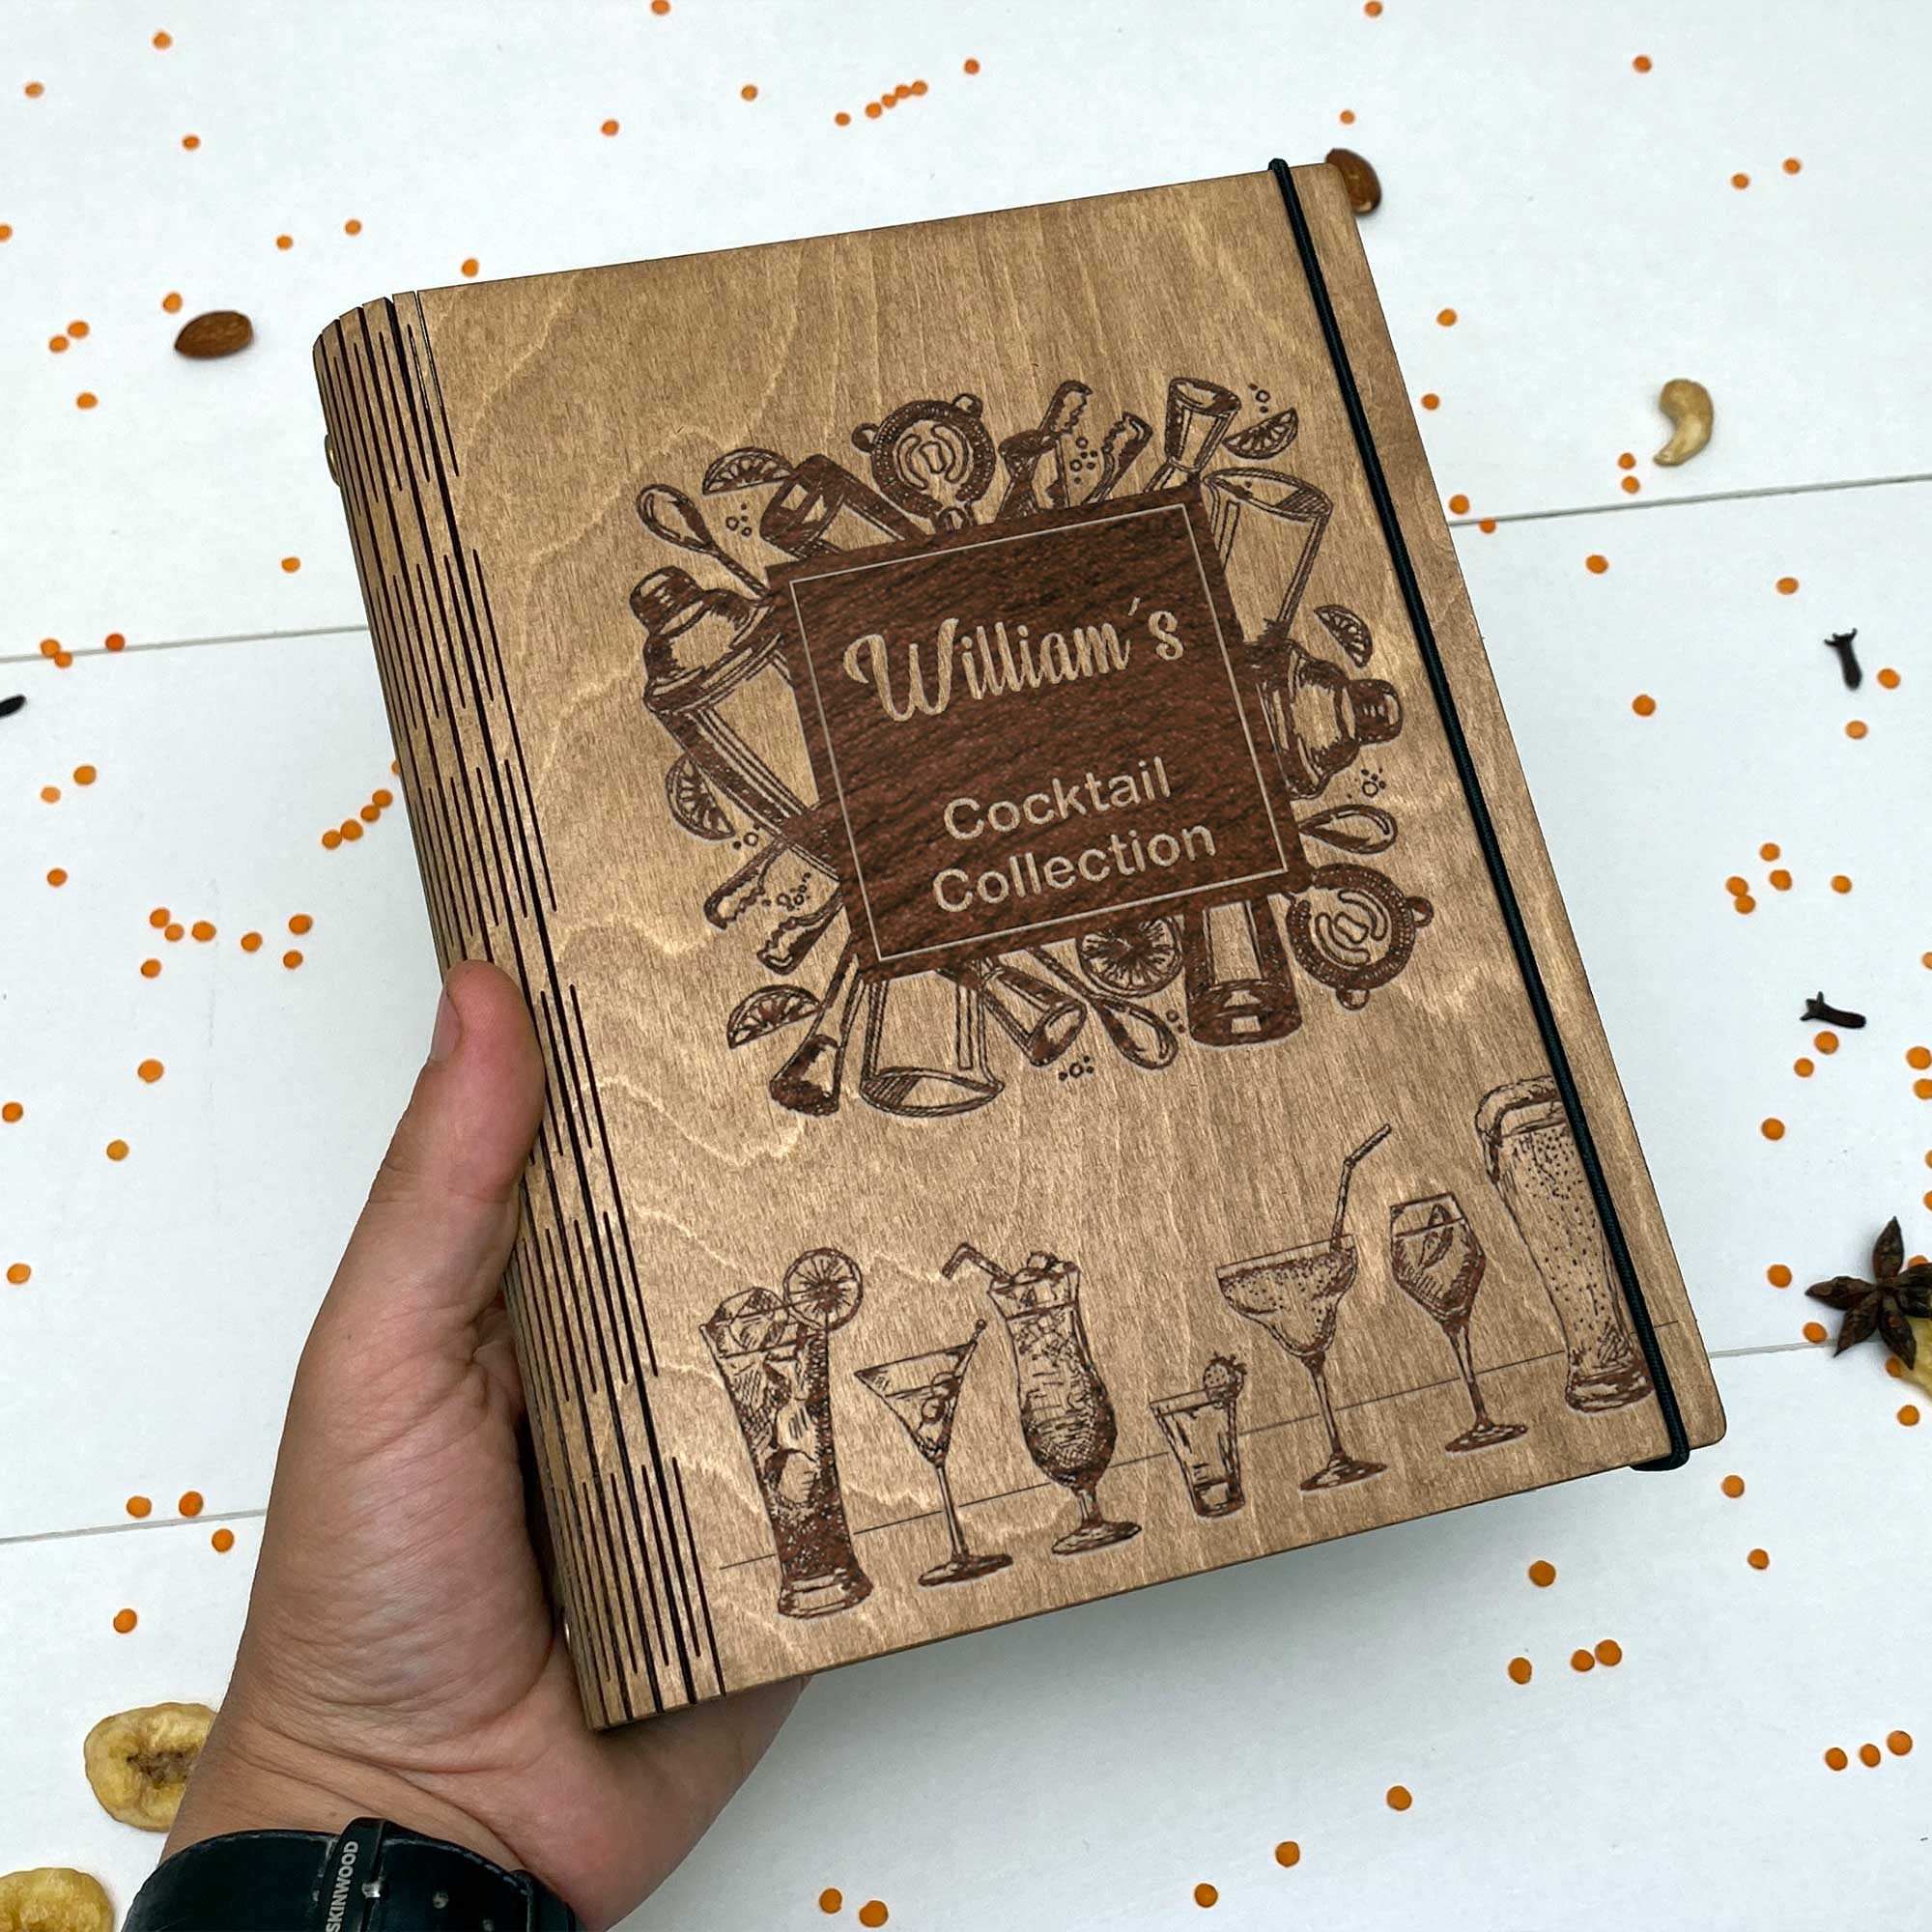 Cockteil collection book Free custom engraving